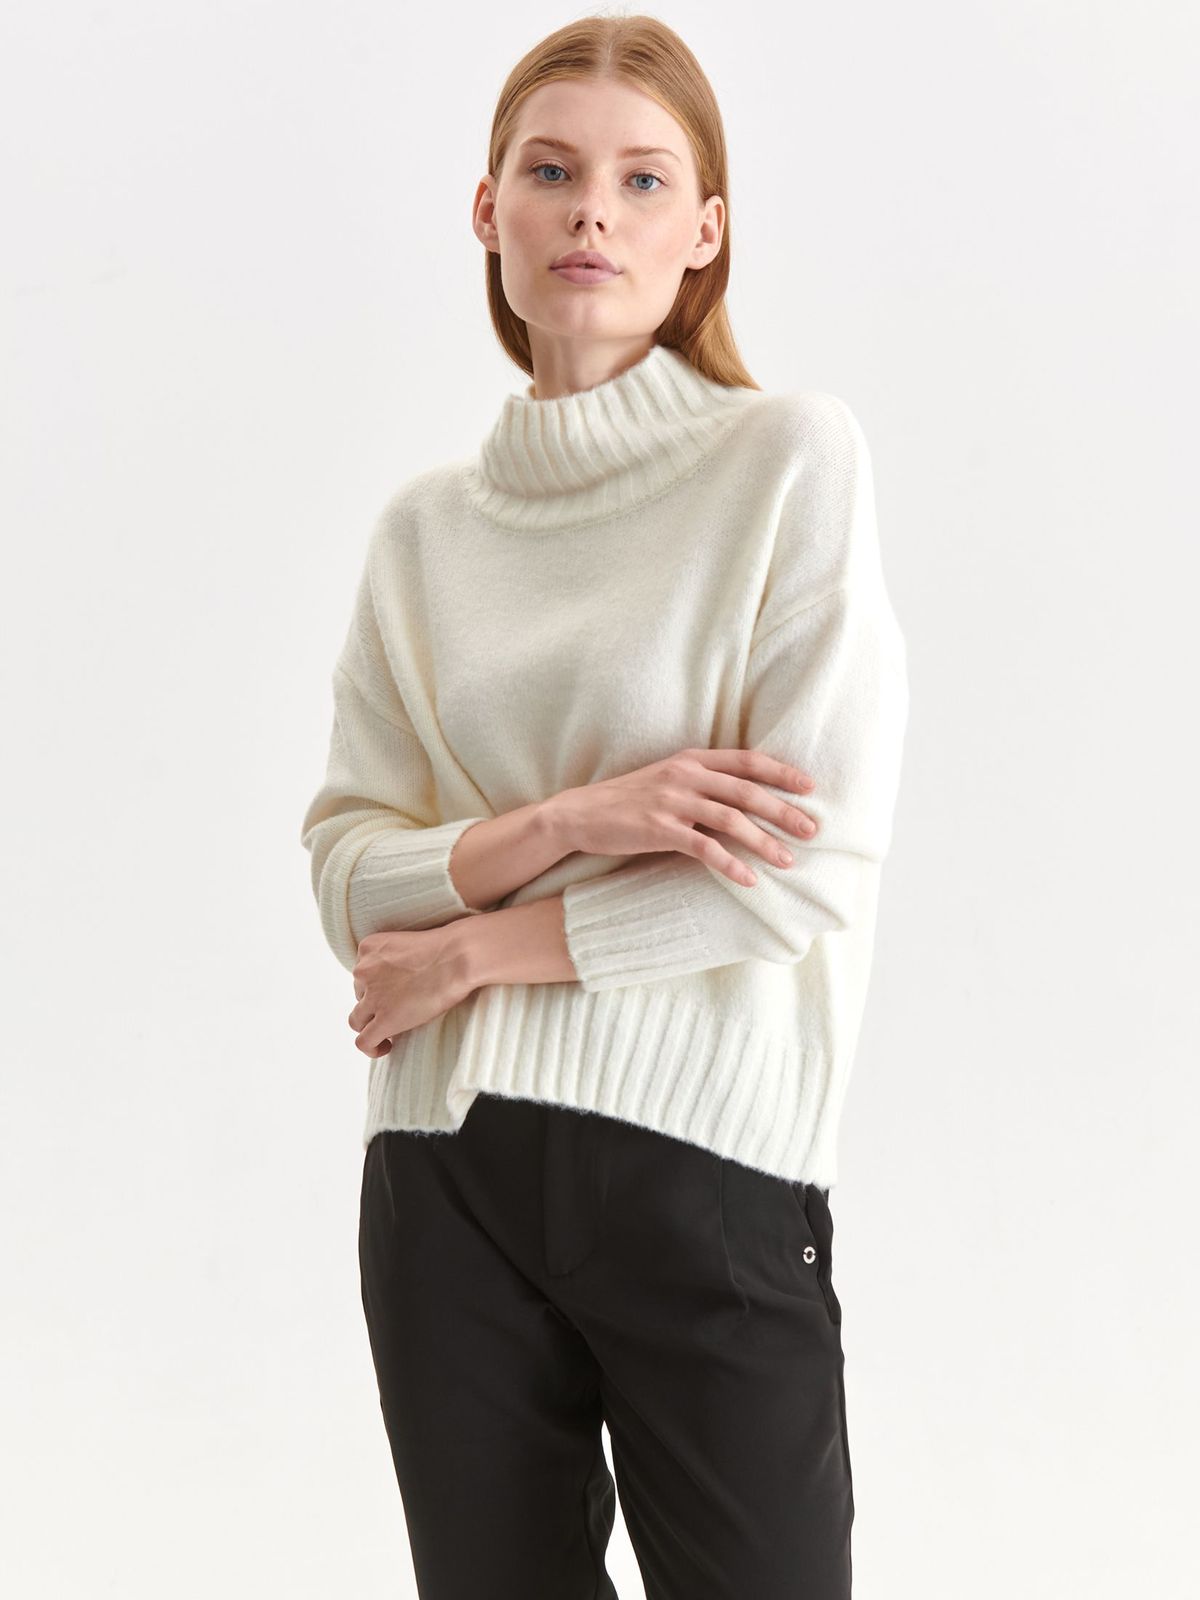 Ivory sweater knitted from fluffy fabric loose fit high collar